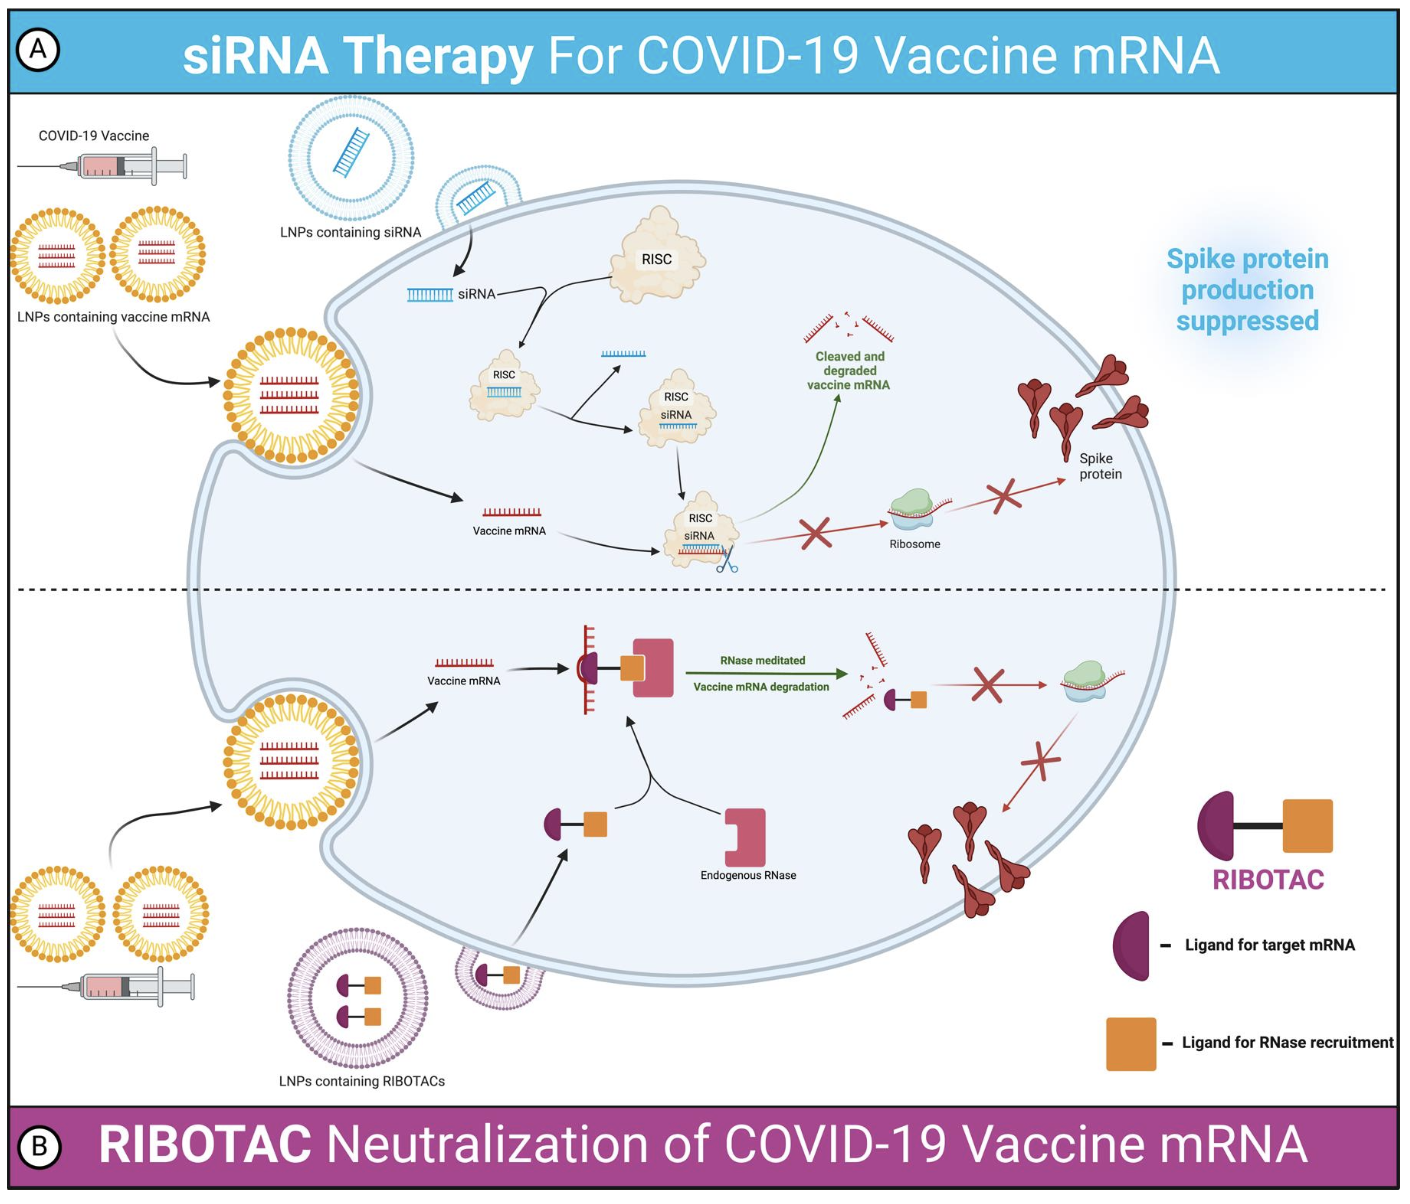 The targeted nature of siRNA and RIBOTACs allows for precise intervention, offering a path to prevent and mitigate adverse events of mRNA-based therapies, according to the study.